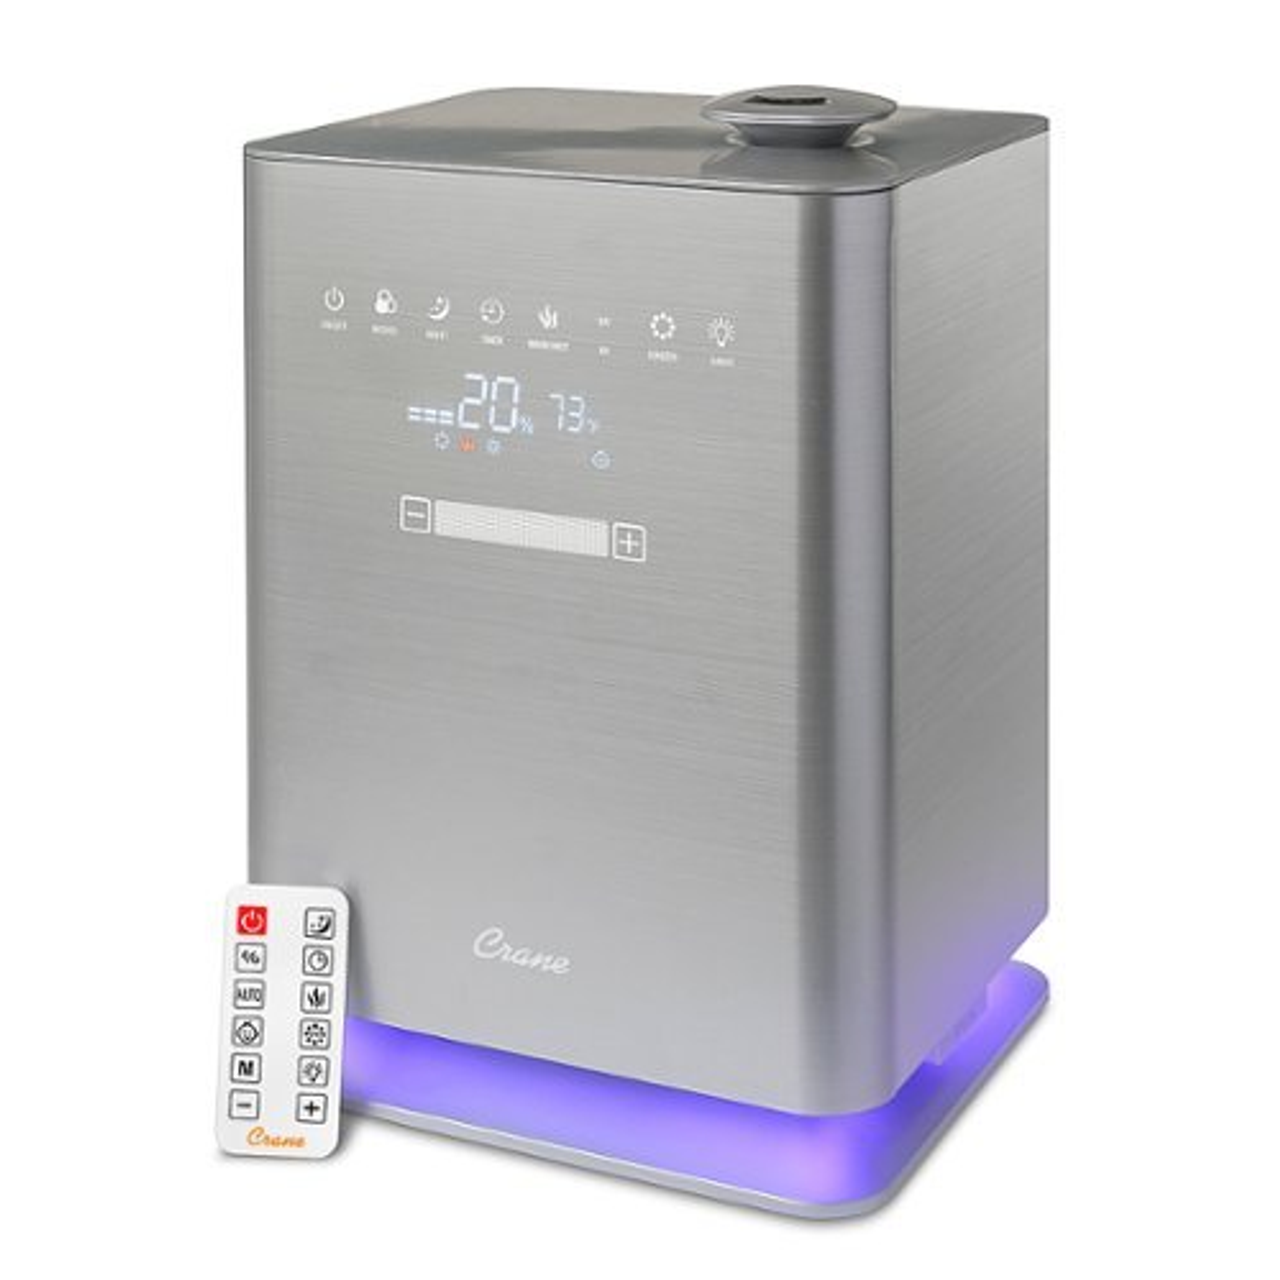 CRANE - 1.2 Gal. Warm & Cool Mist Top Fill Humidifier with Remote for Medium to Large Rooms up to 500 sq. ft - Gray